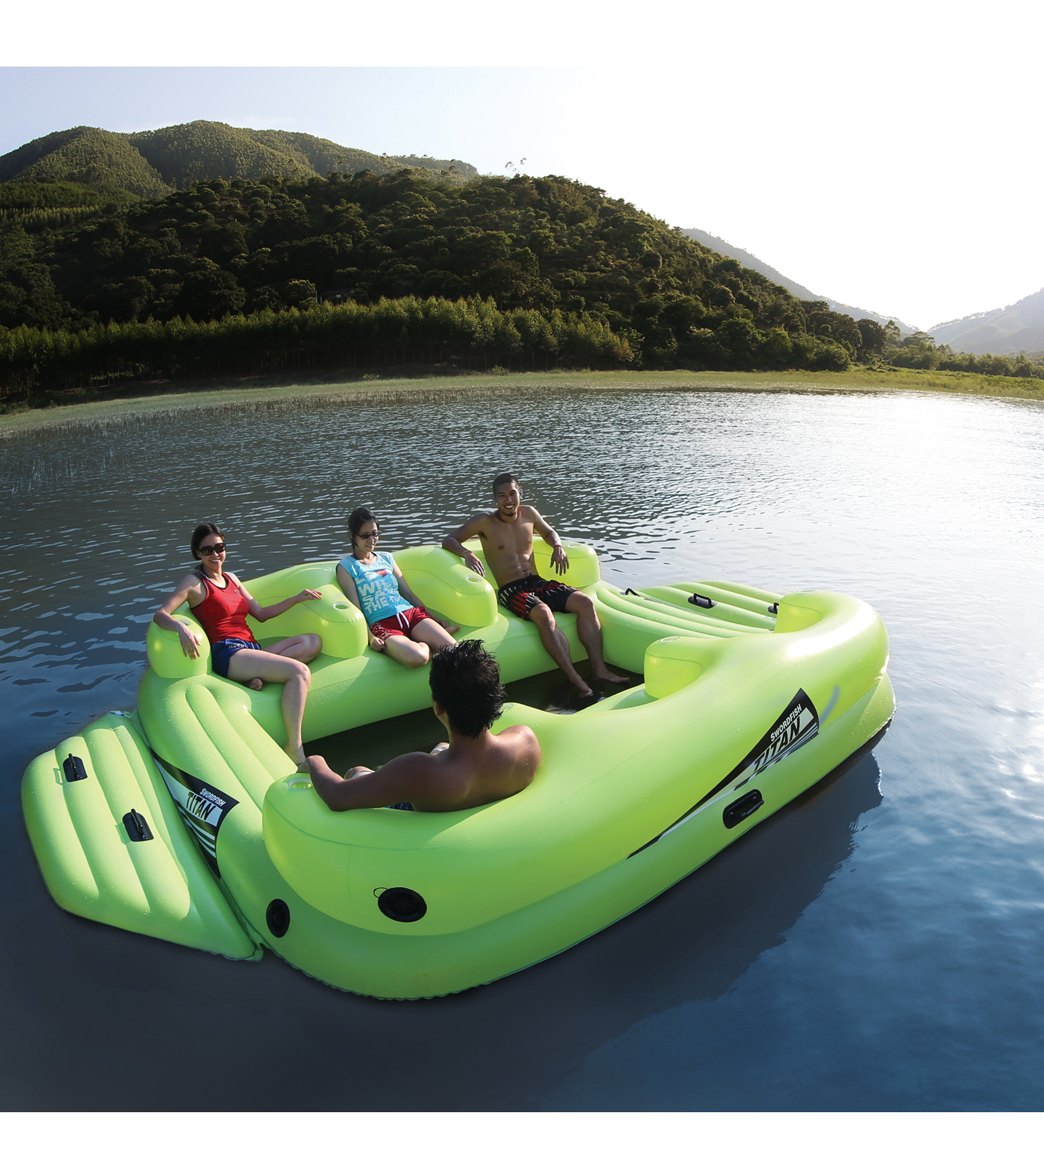 inflatable swim raft But every time the music faded I’d turn it back up aga...